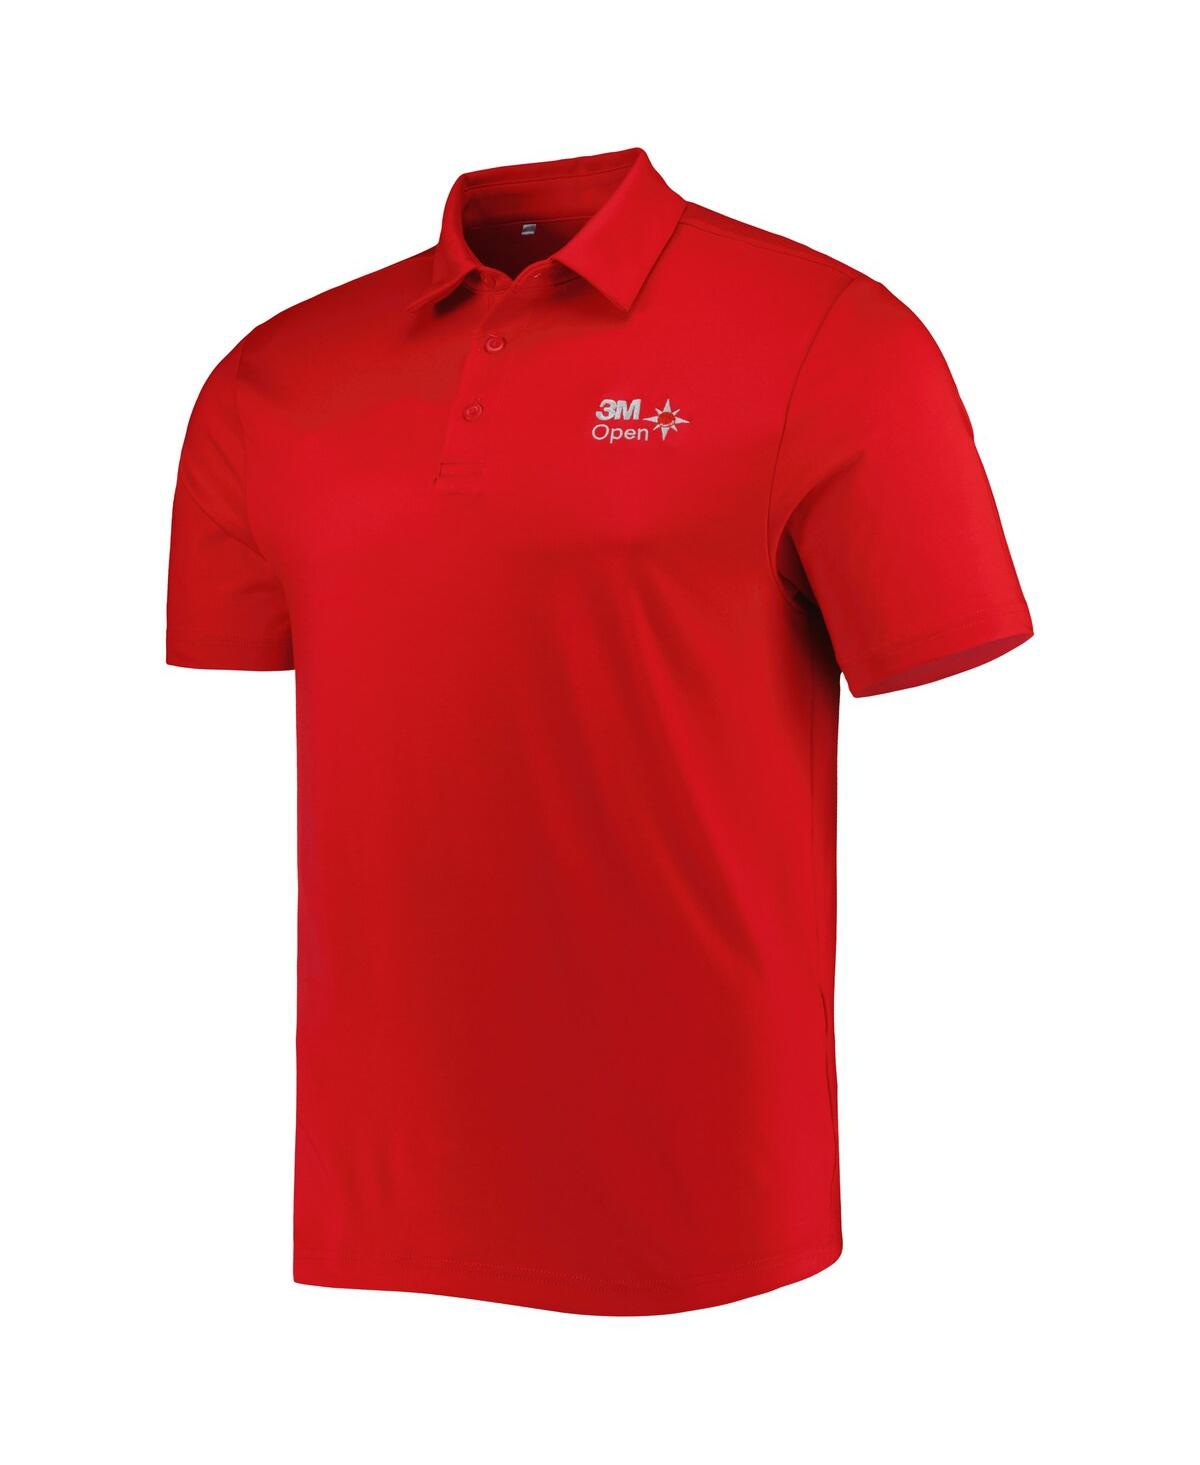 Shop Under Armour Men's  Red 3m Open T2 Green Polo Shirt